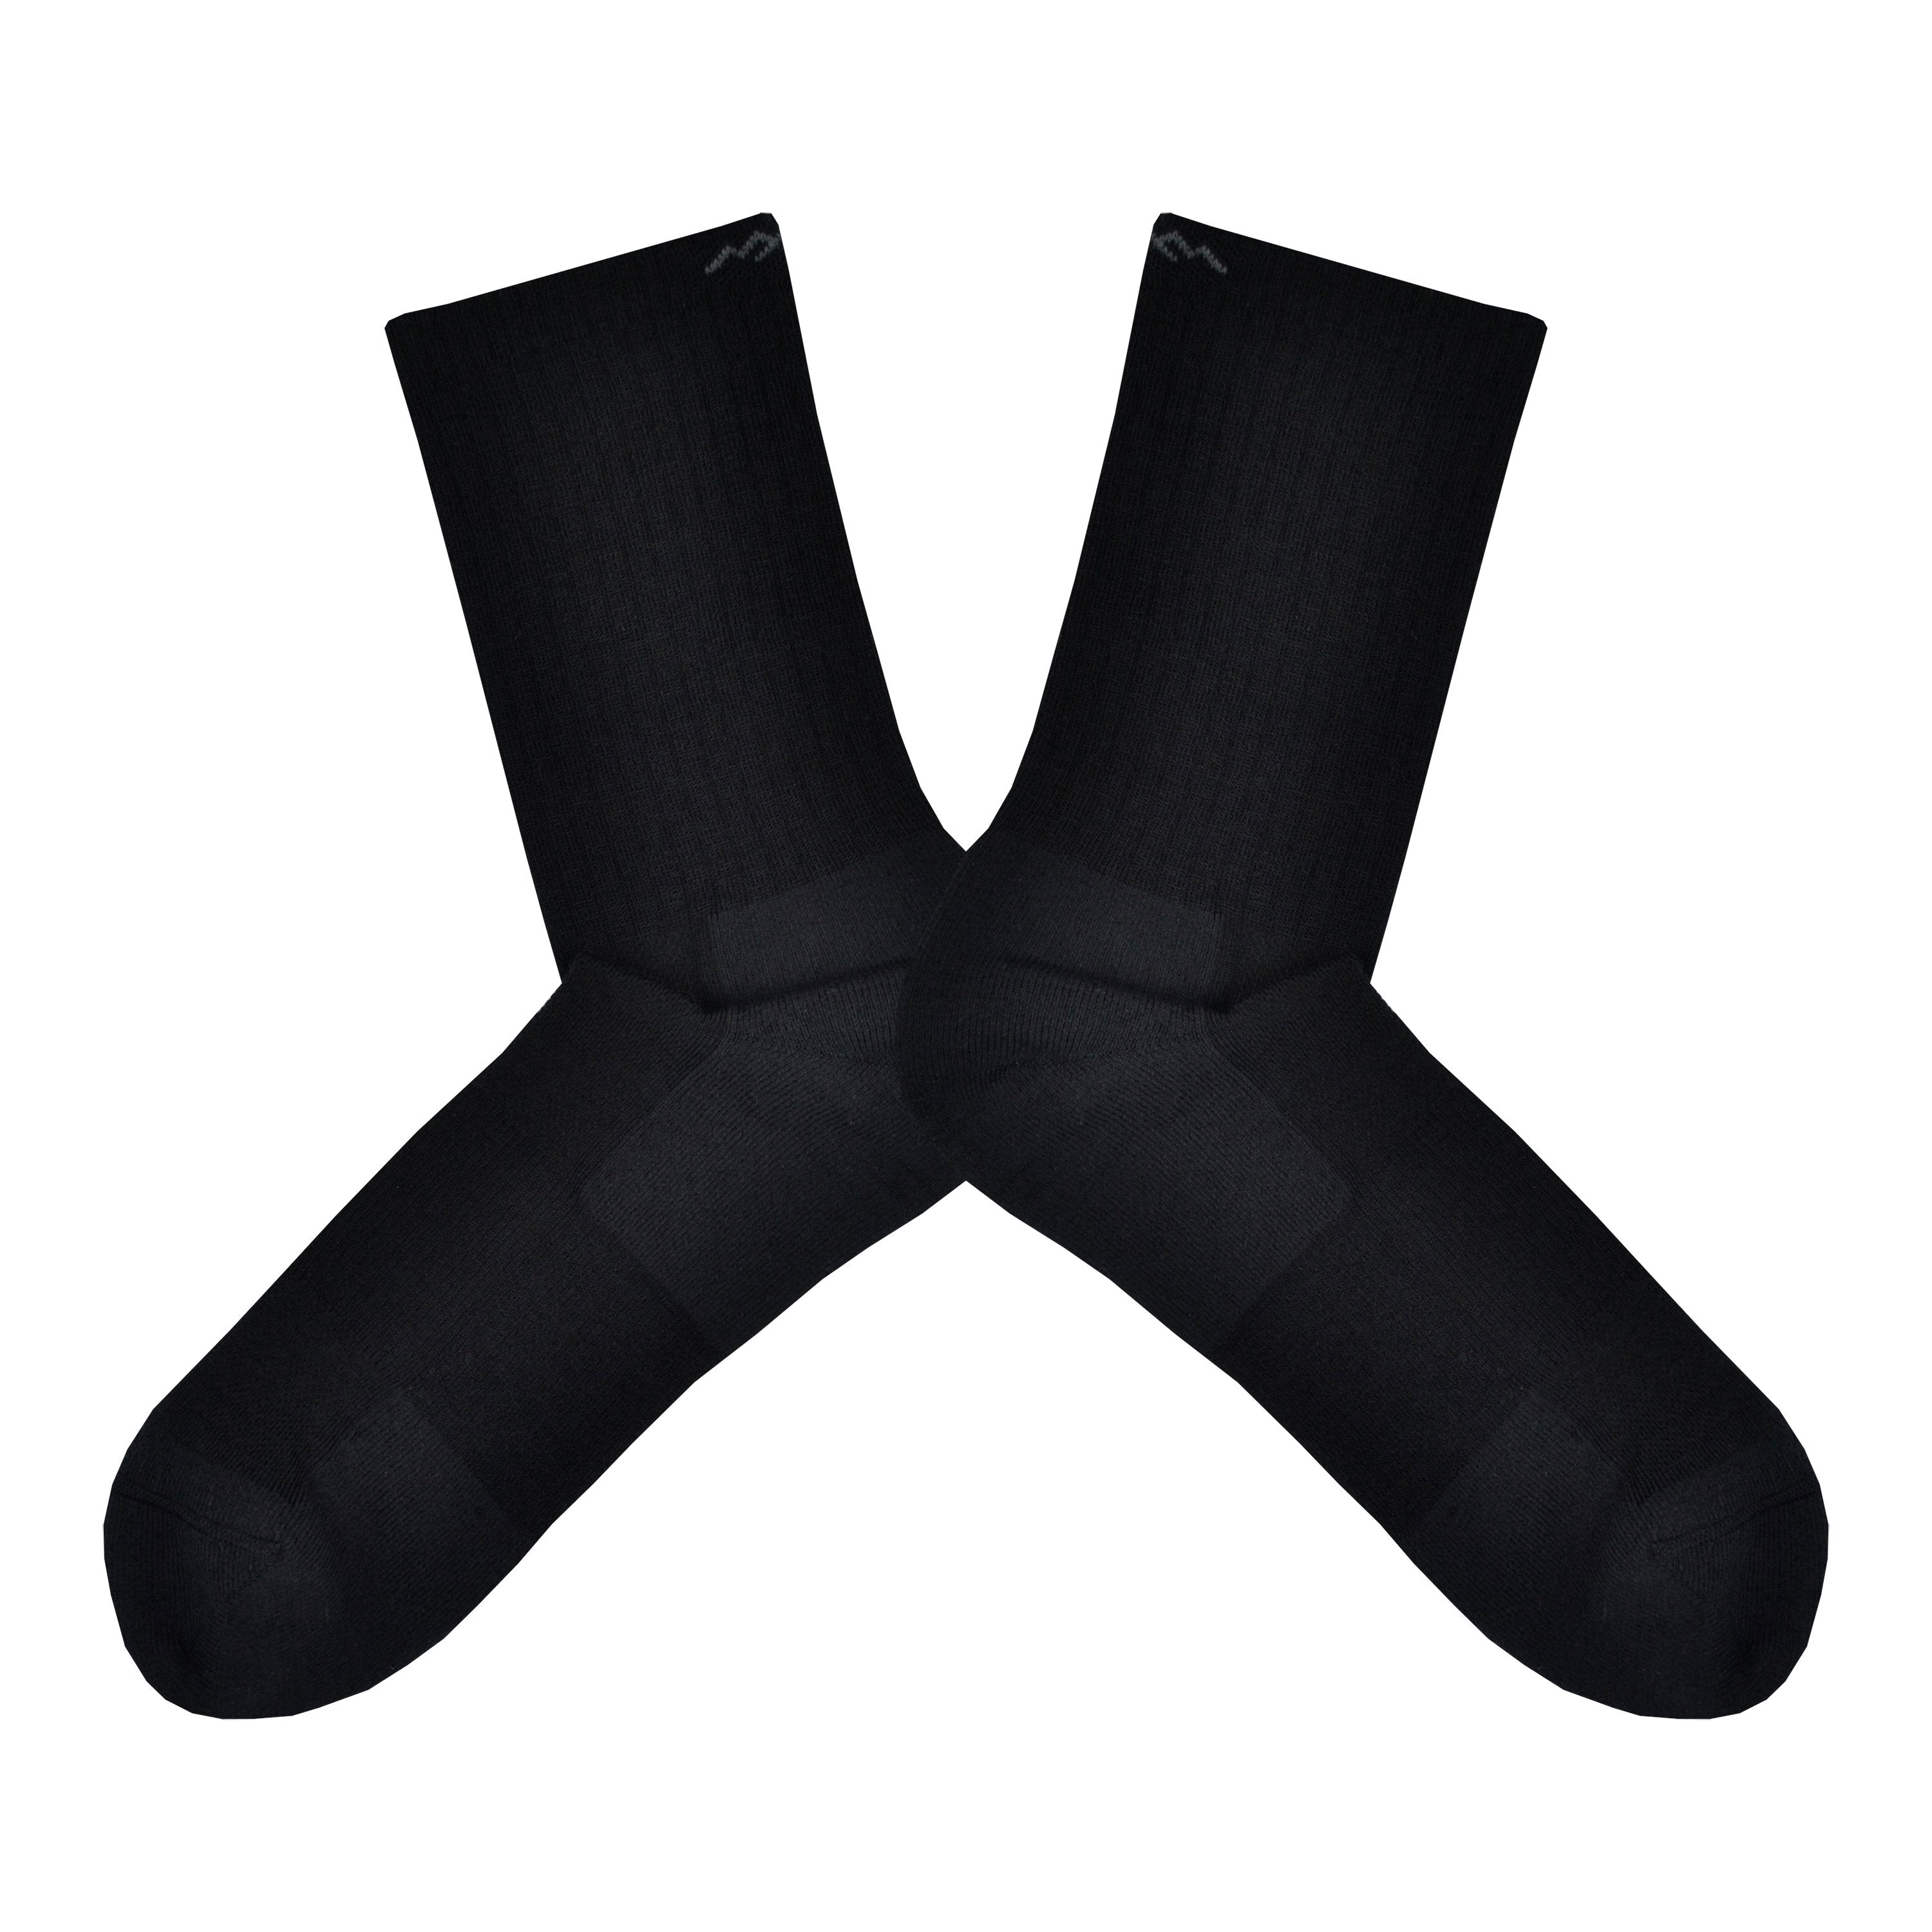 Shown in a flatlay, a pair of men's Darn Tough black crew socks. These socks are Merino Wool and Nylon.